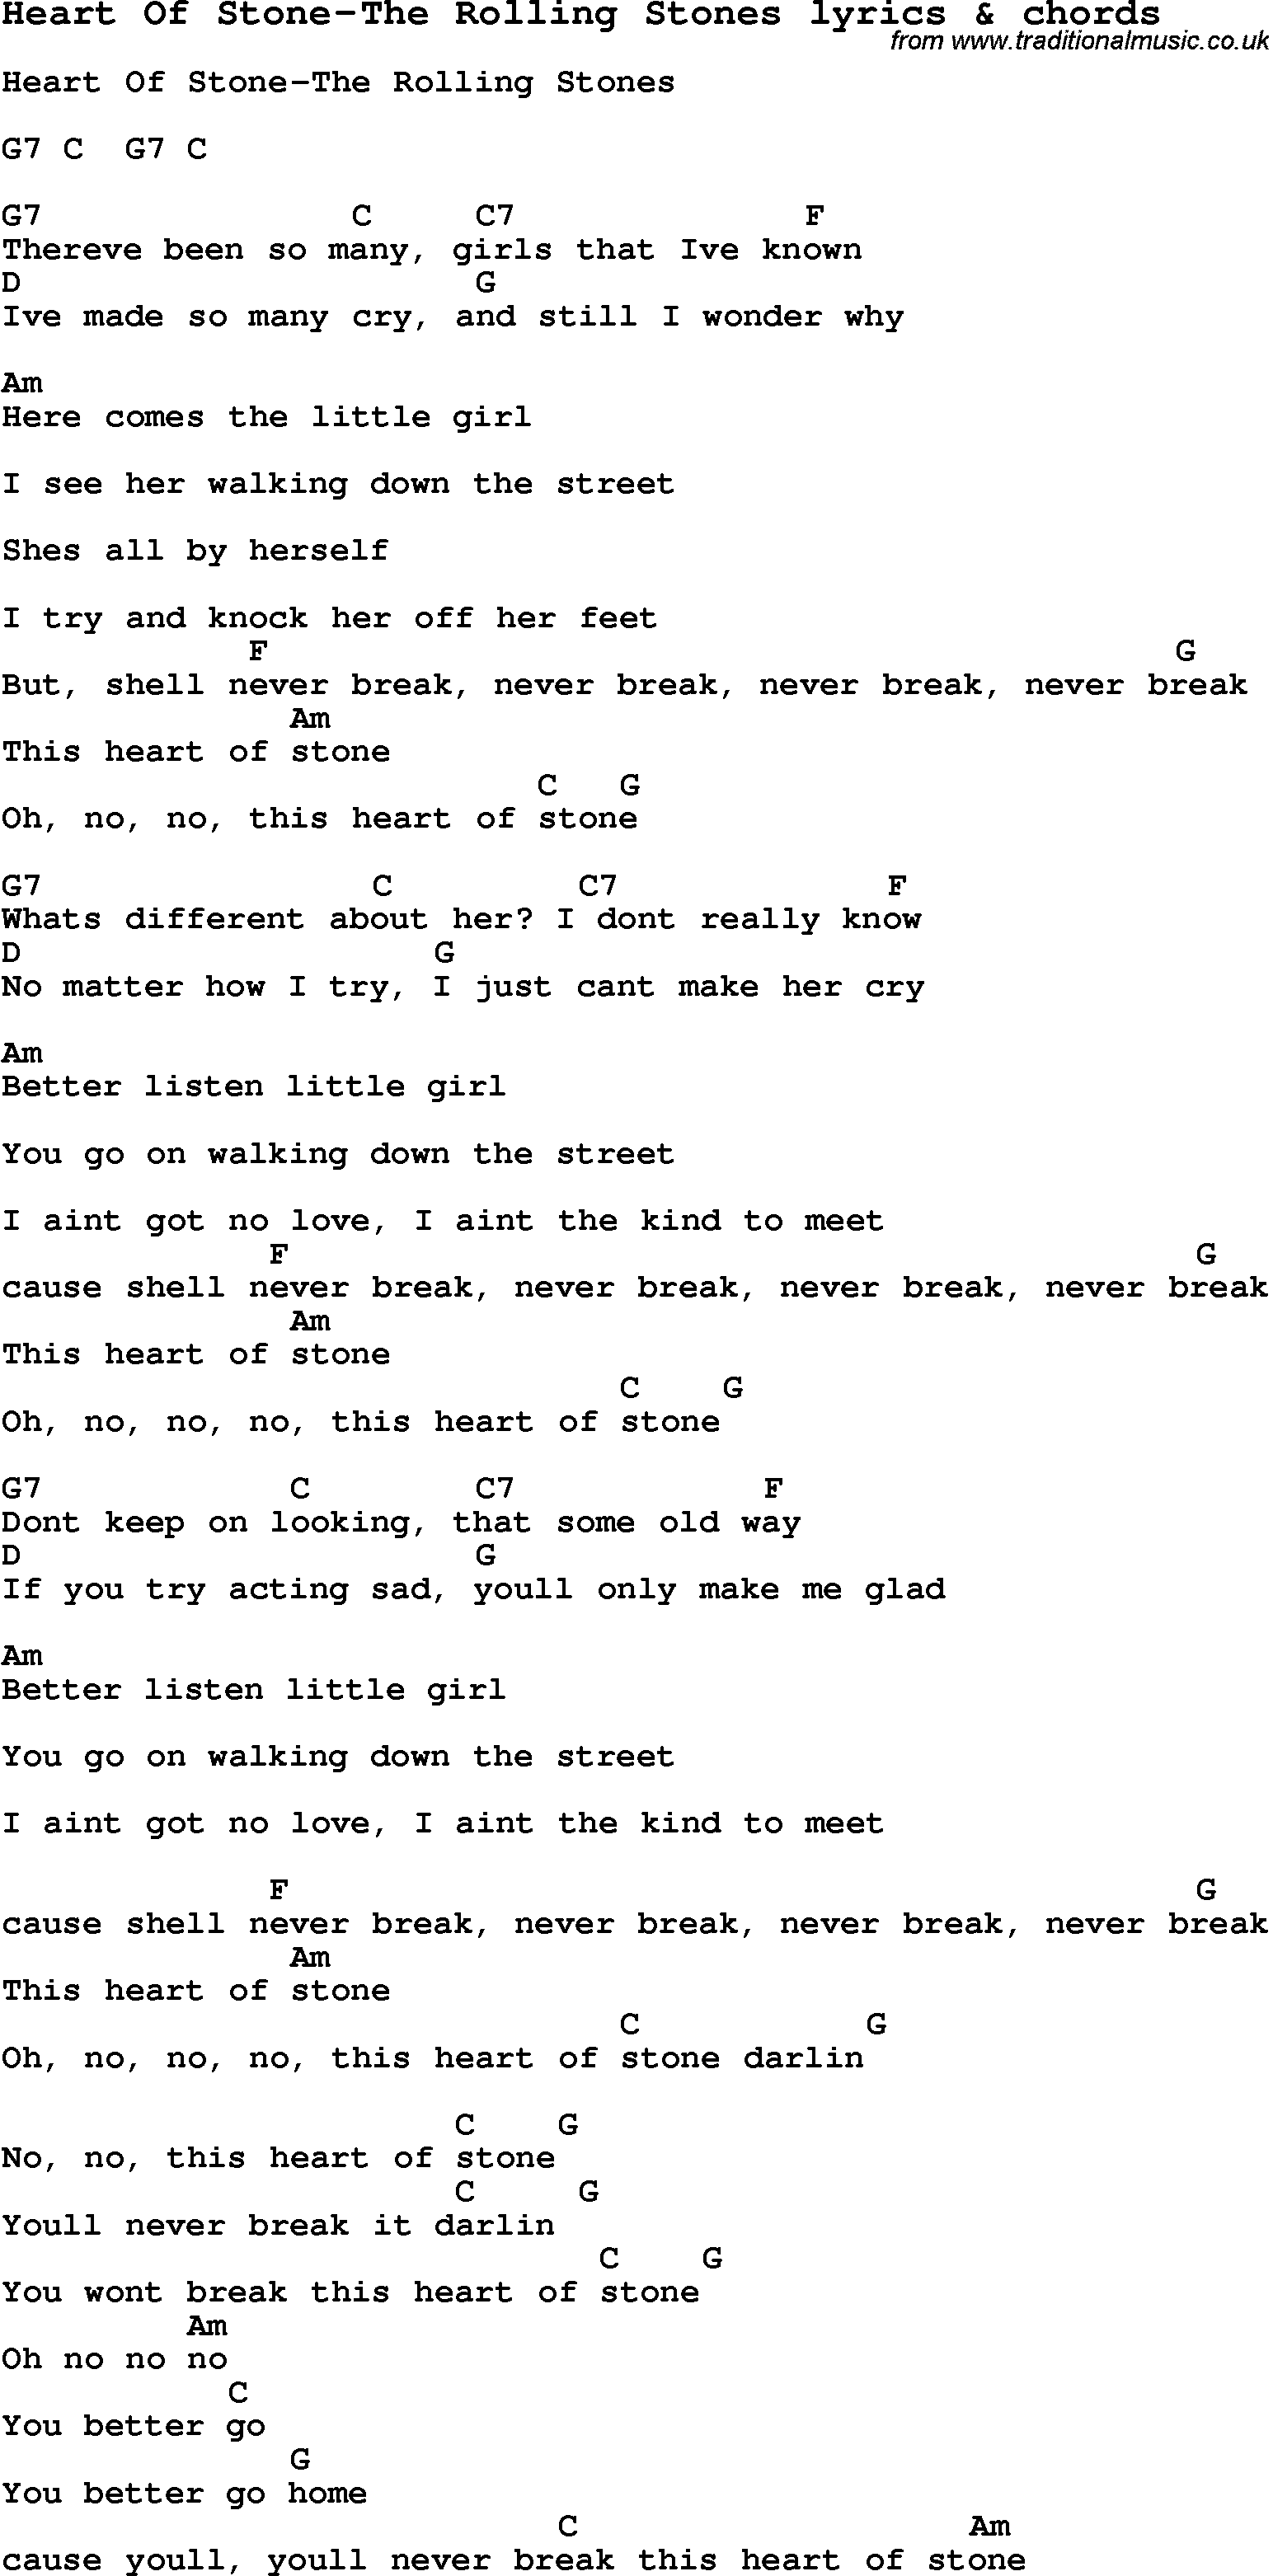 Love Song Lyrics for: Heart Of Stone-The Rolling Stones with chords for Ukulele, Guitar Banjo etc.